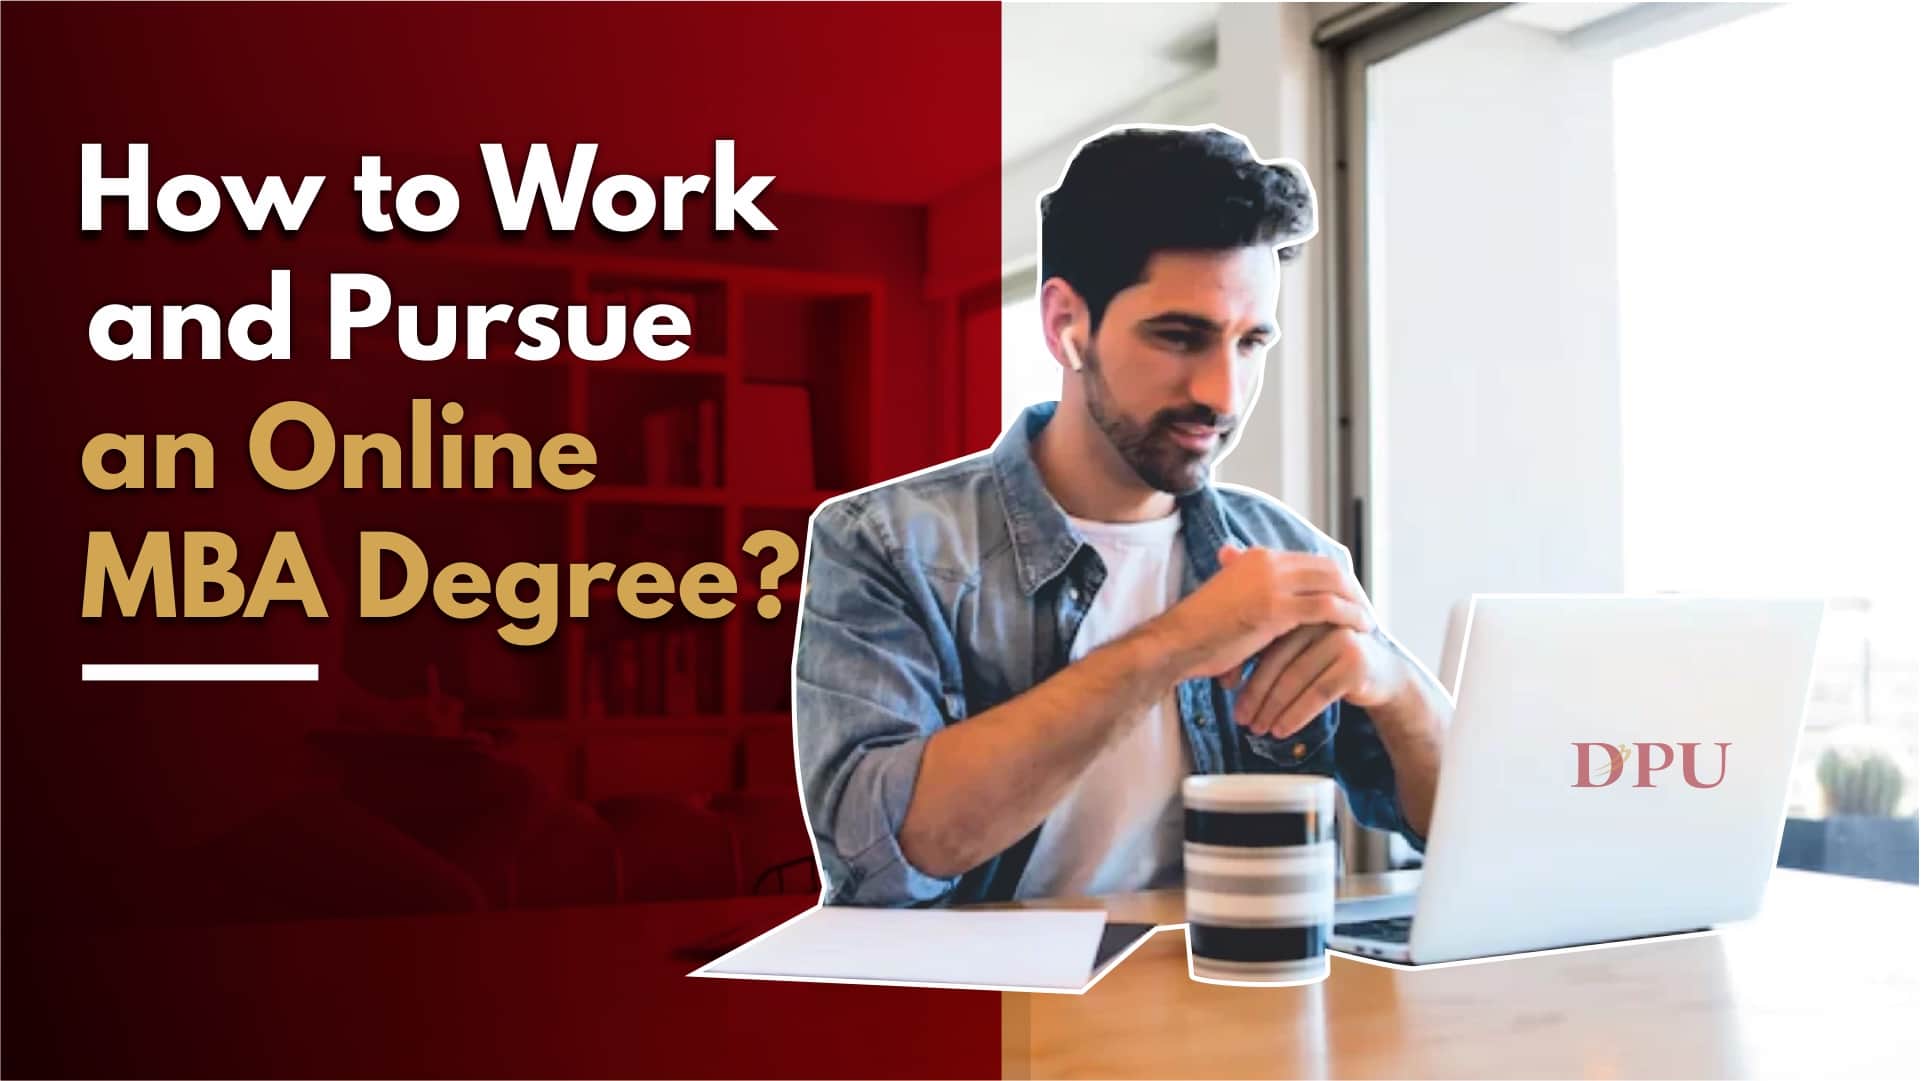 How to Work and Pursue an Online MBA Degree?